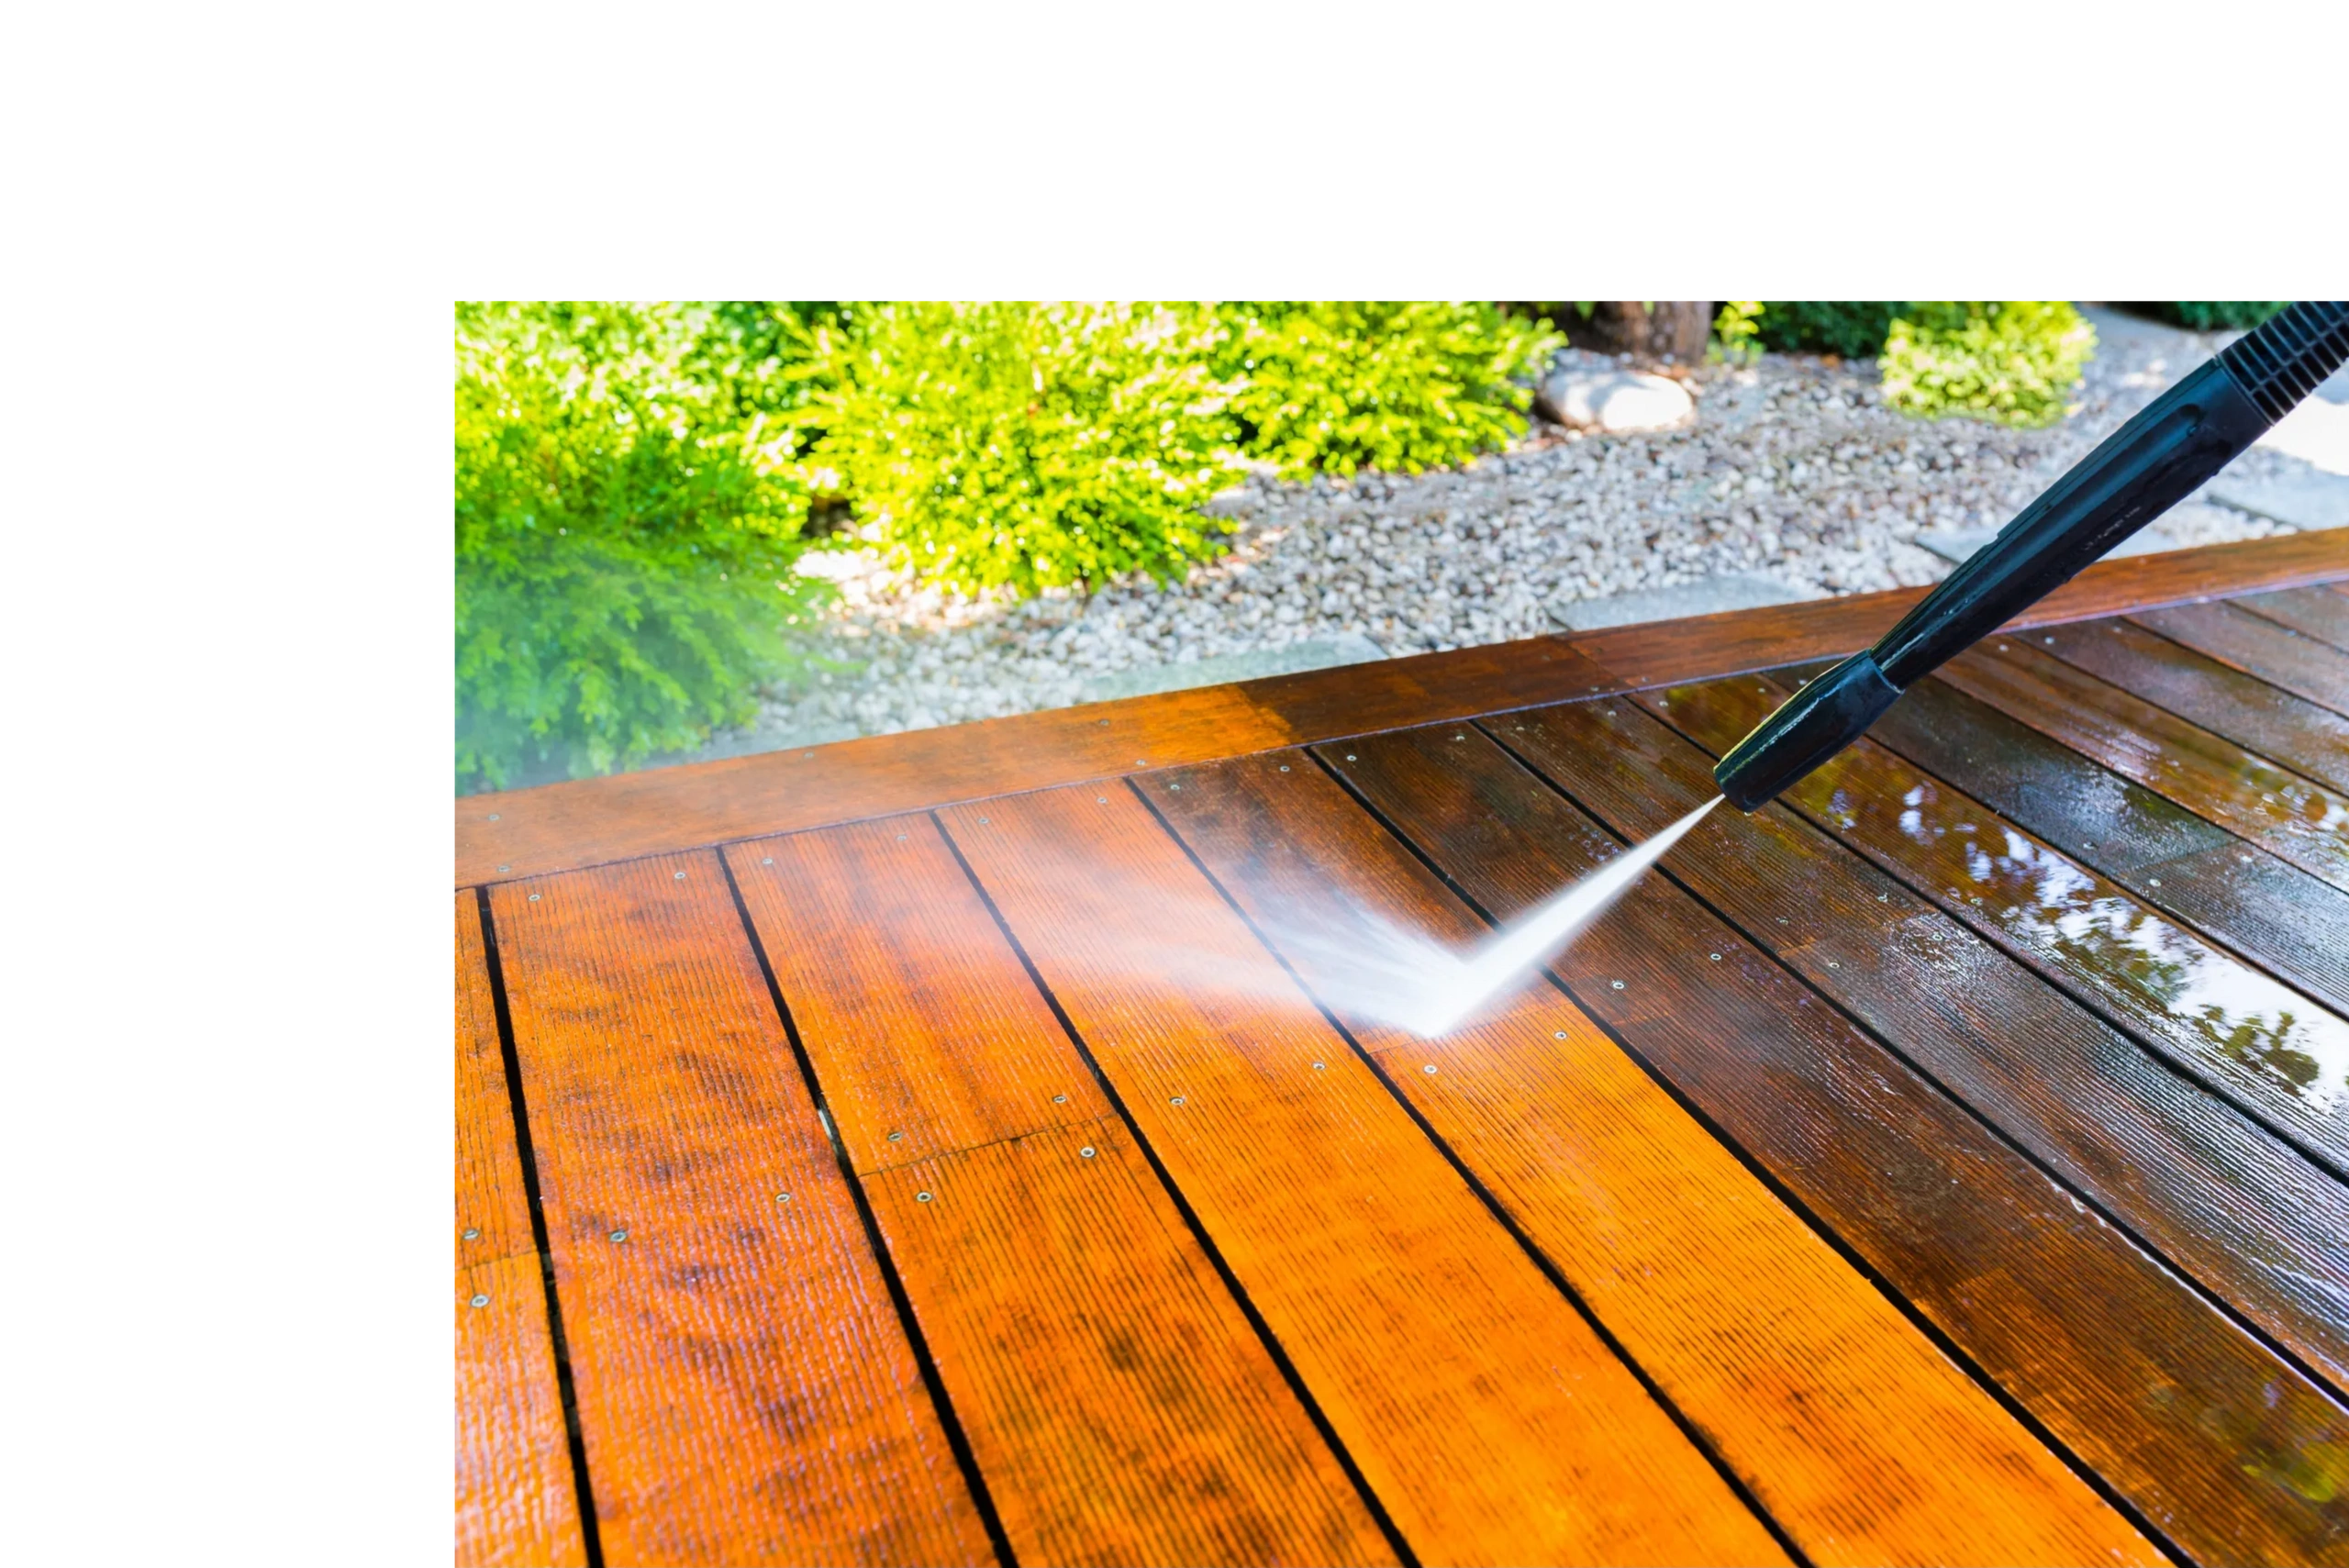 power washing wood deck, patio with pressure washer